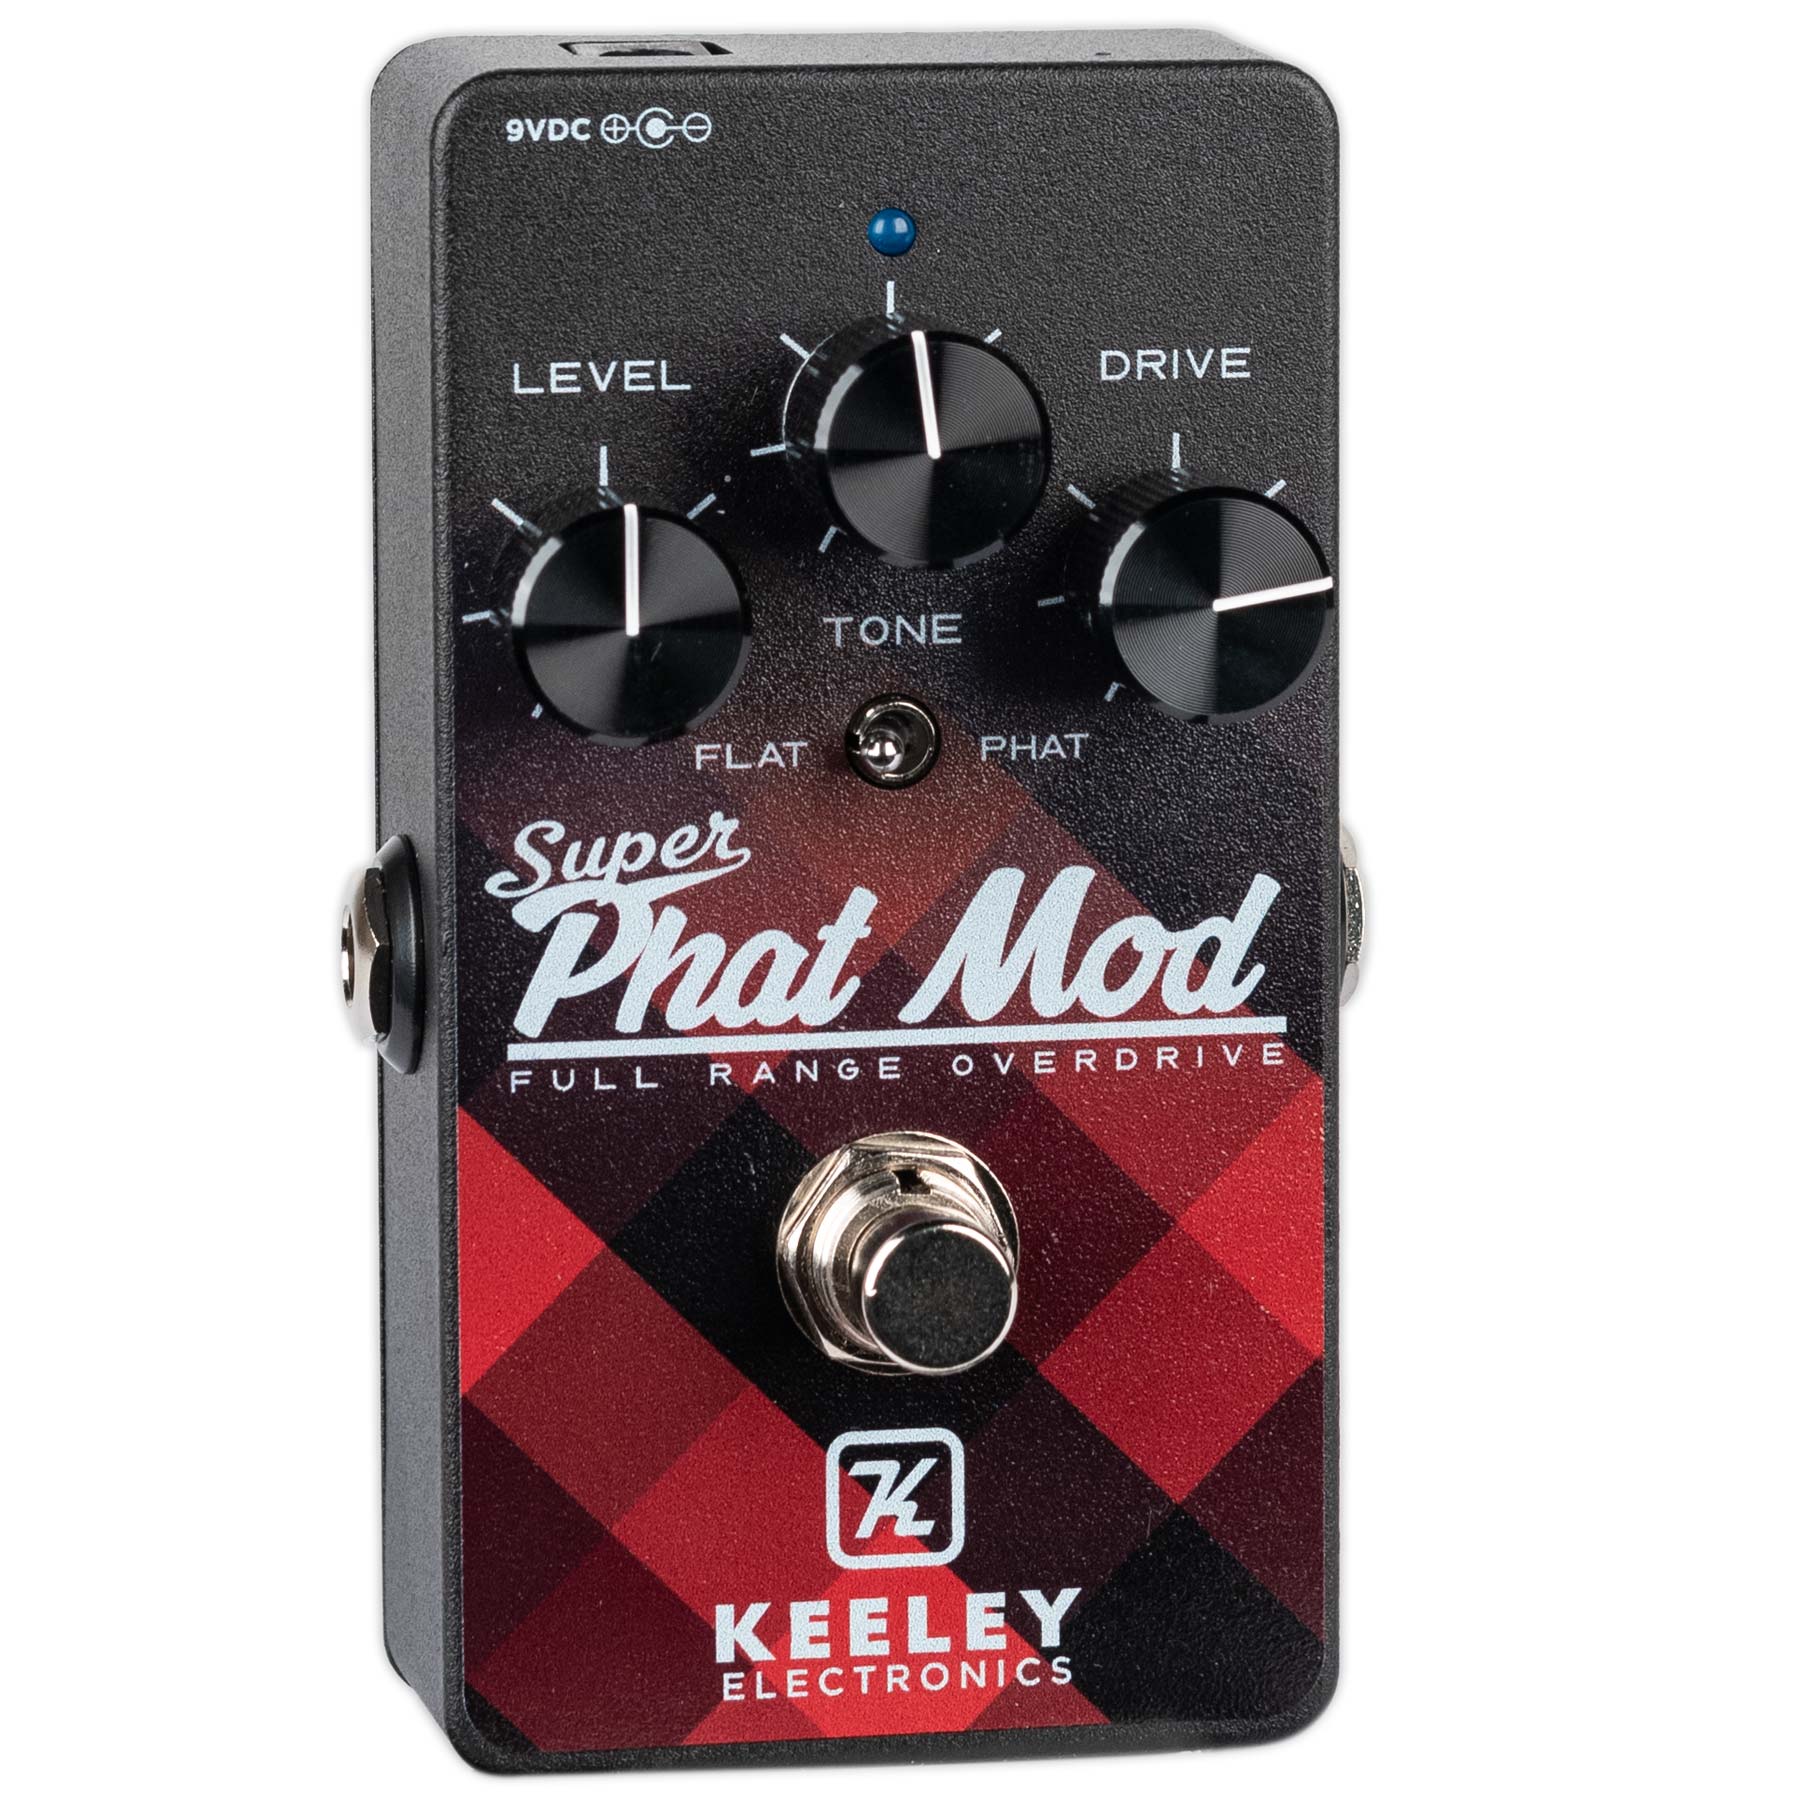 KEELEY GERMANIUM SUPER PHAT MOD FULL RANGE OVERDRIVE CANADIAN LIMITED EDITION